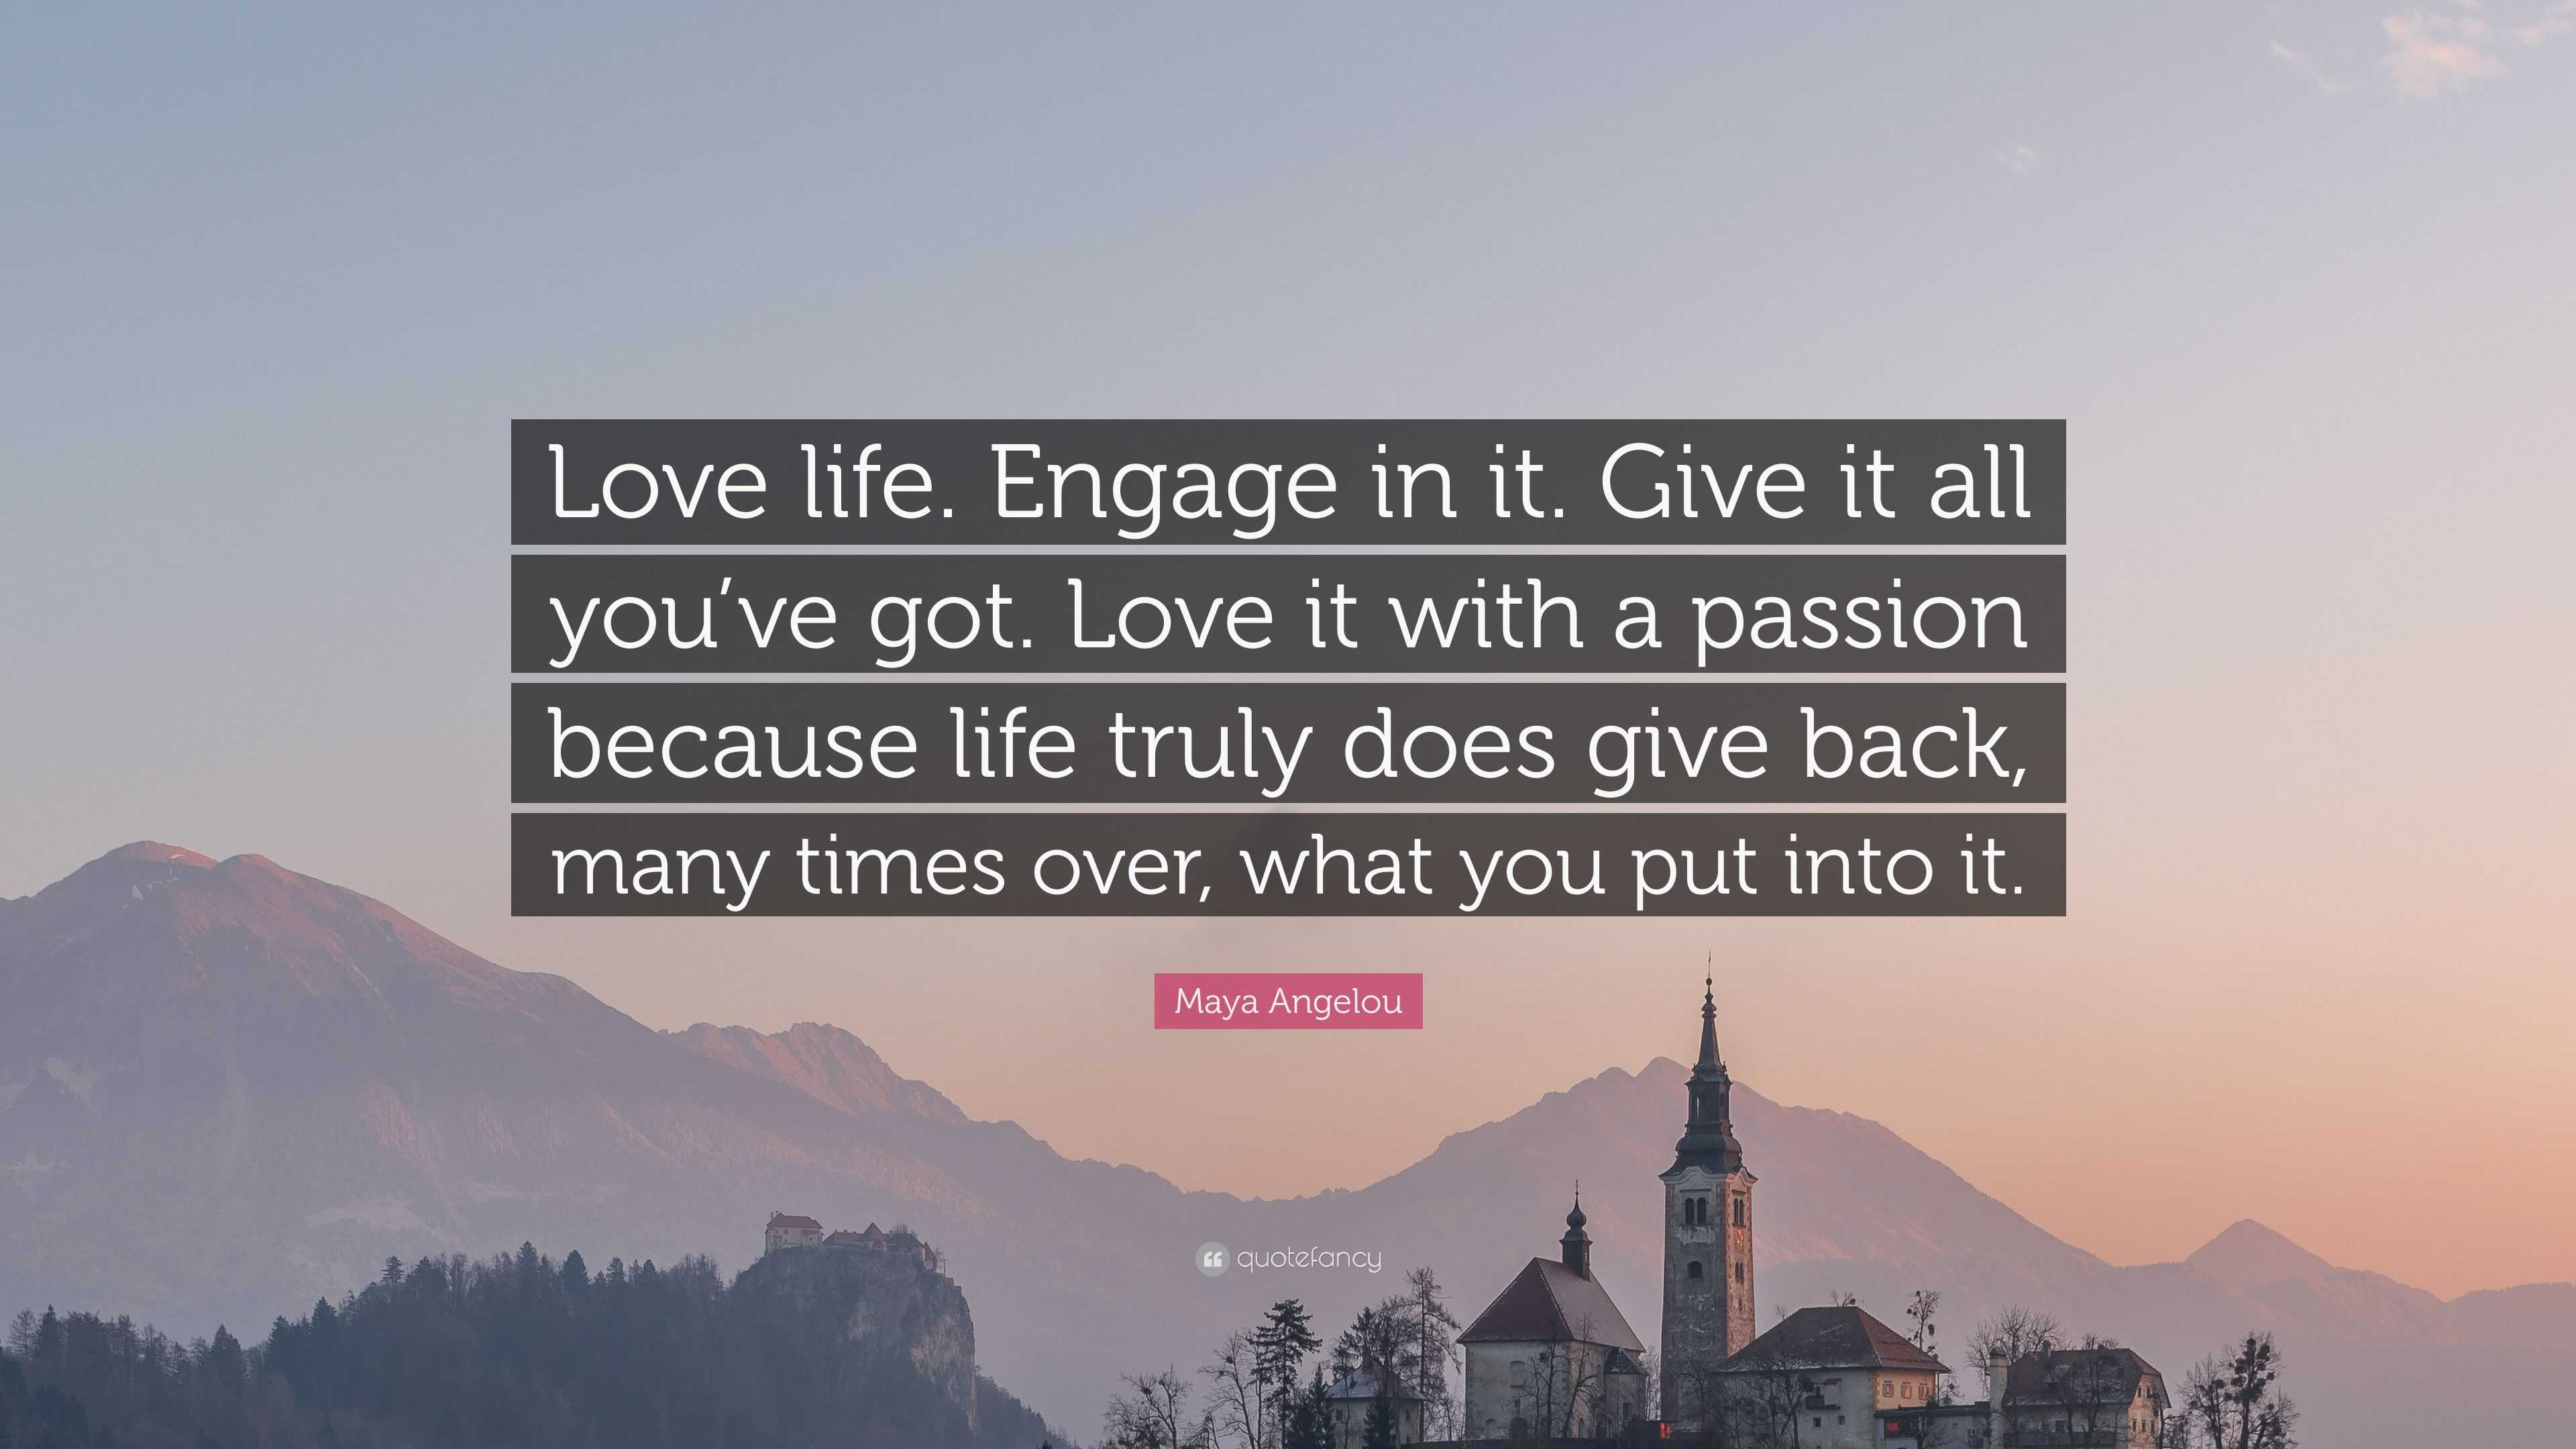 Get back in the game! #Engage  Me quotes, Inspirational quotes